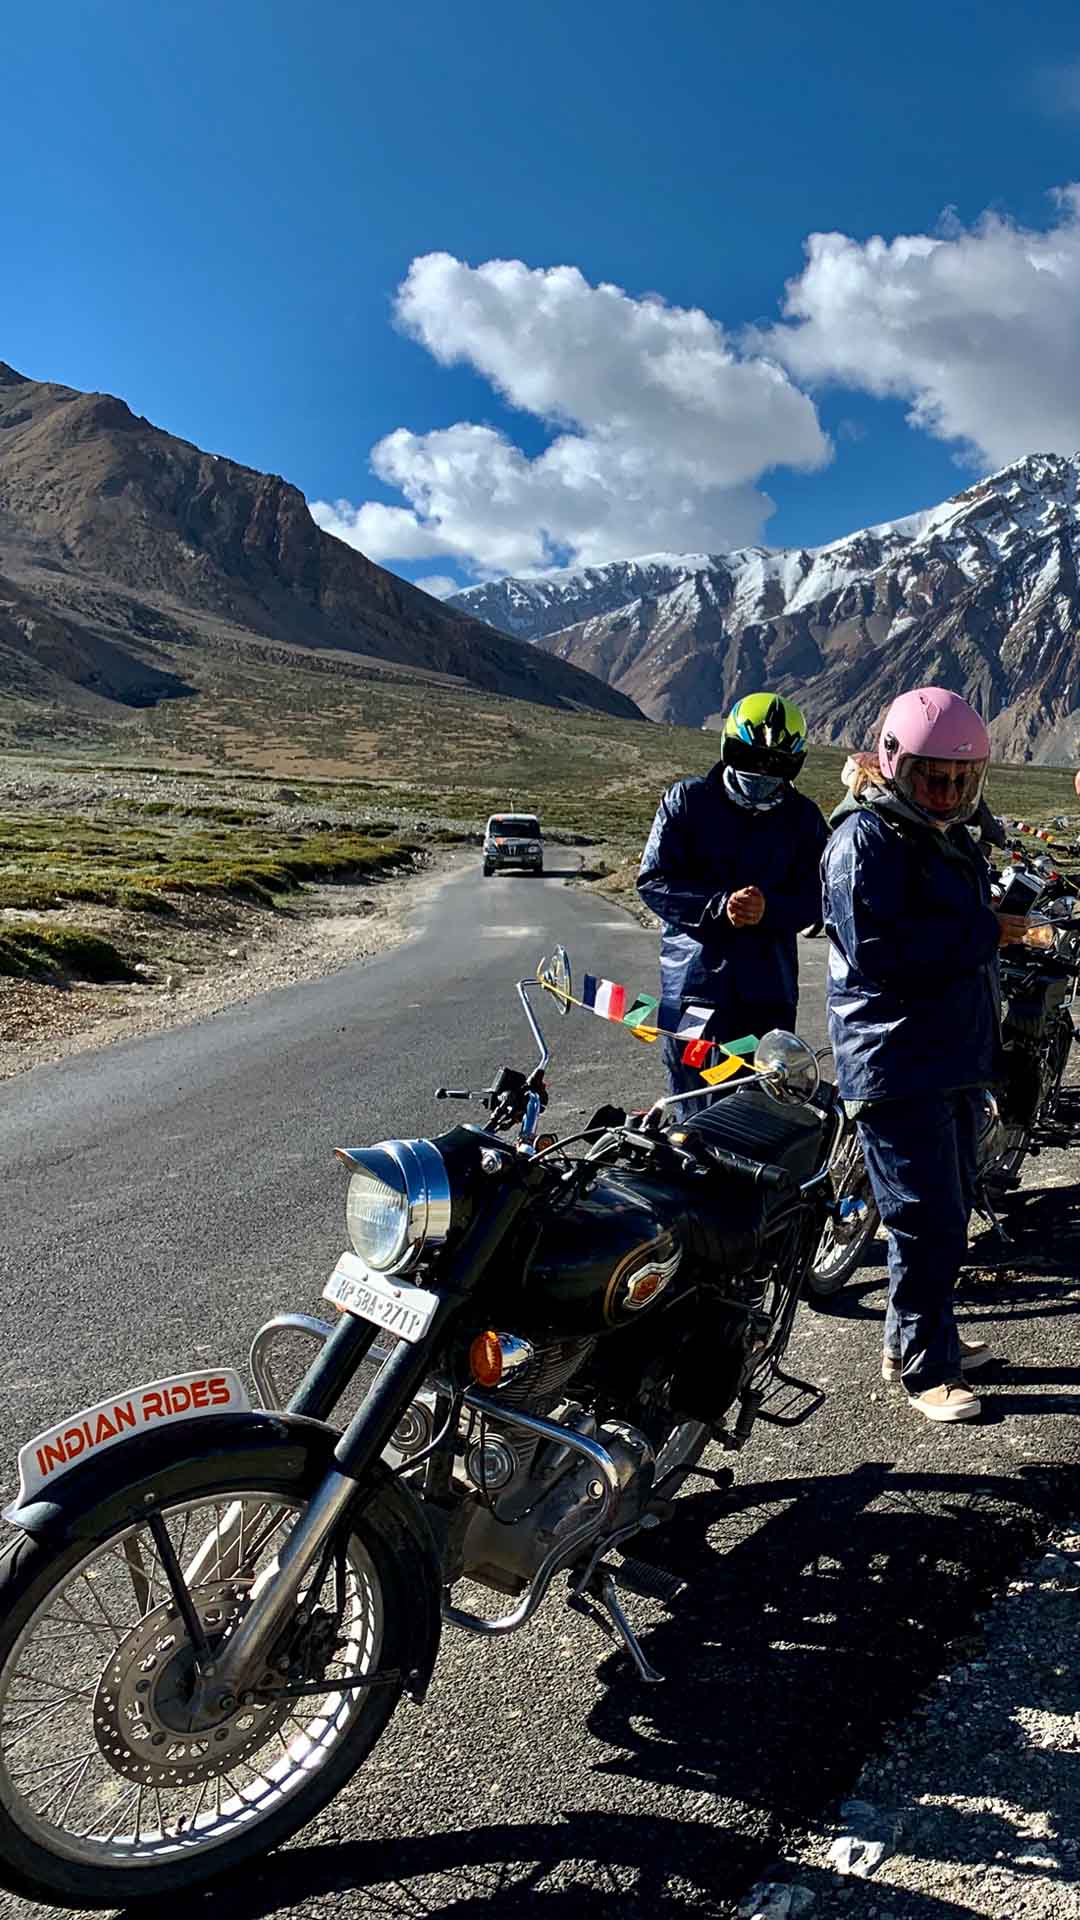 A view of snow capped mountains, desert & bikers I Bikers on a Journey to the Sacred Monasteries of Himalayas on Motorcycle